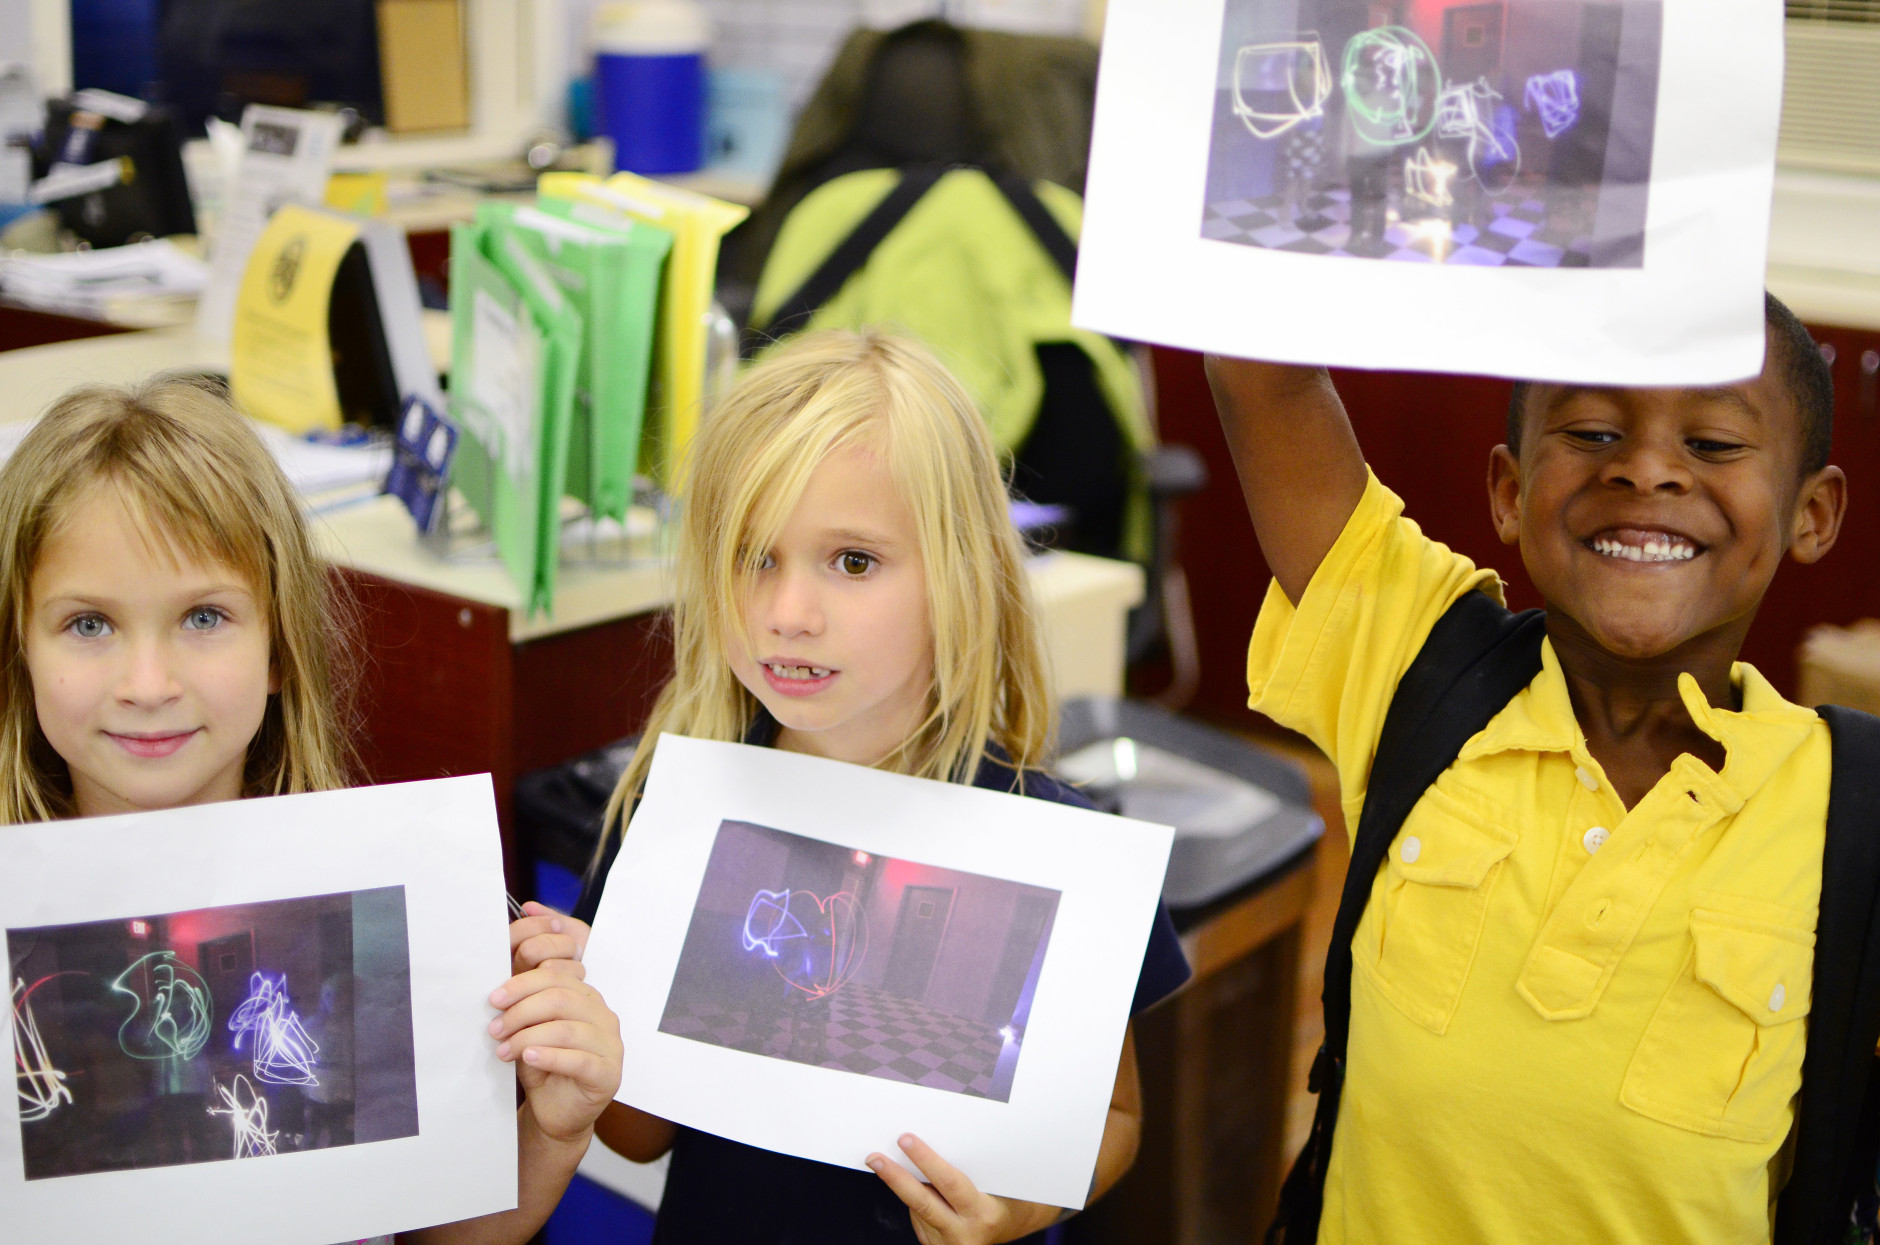 Proud CHAW students showing off their work from photography class.  (Leslie Mansour/CHAW)